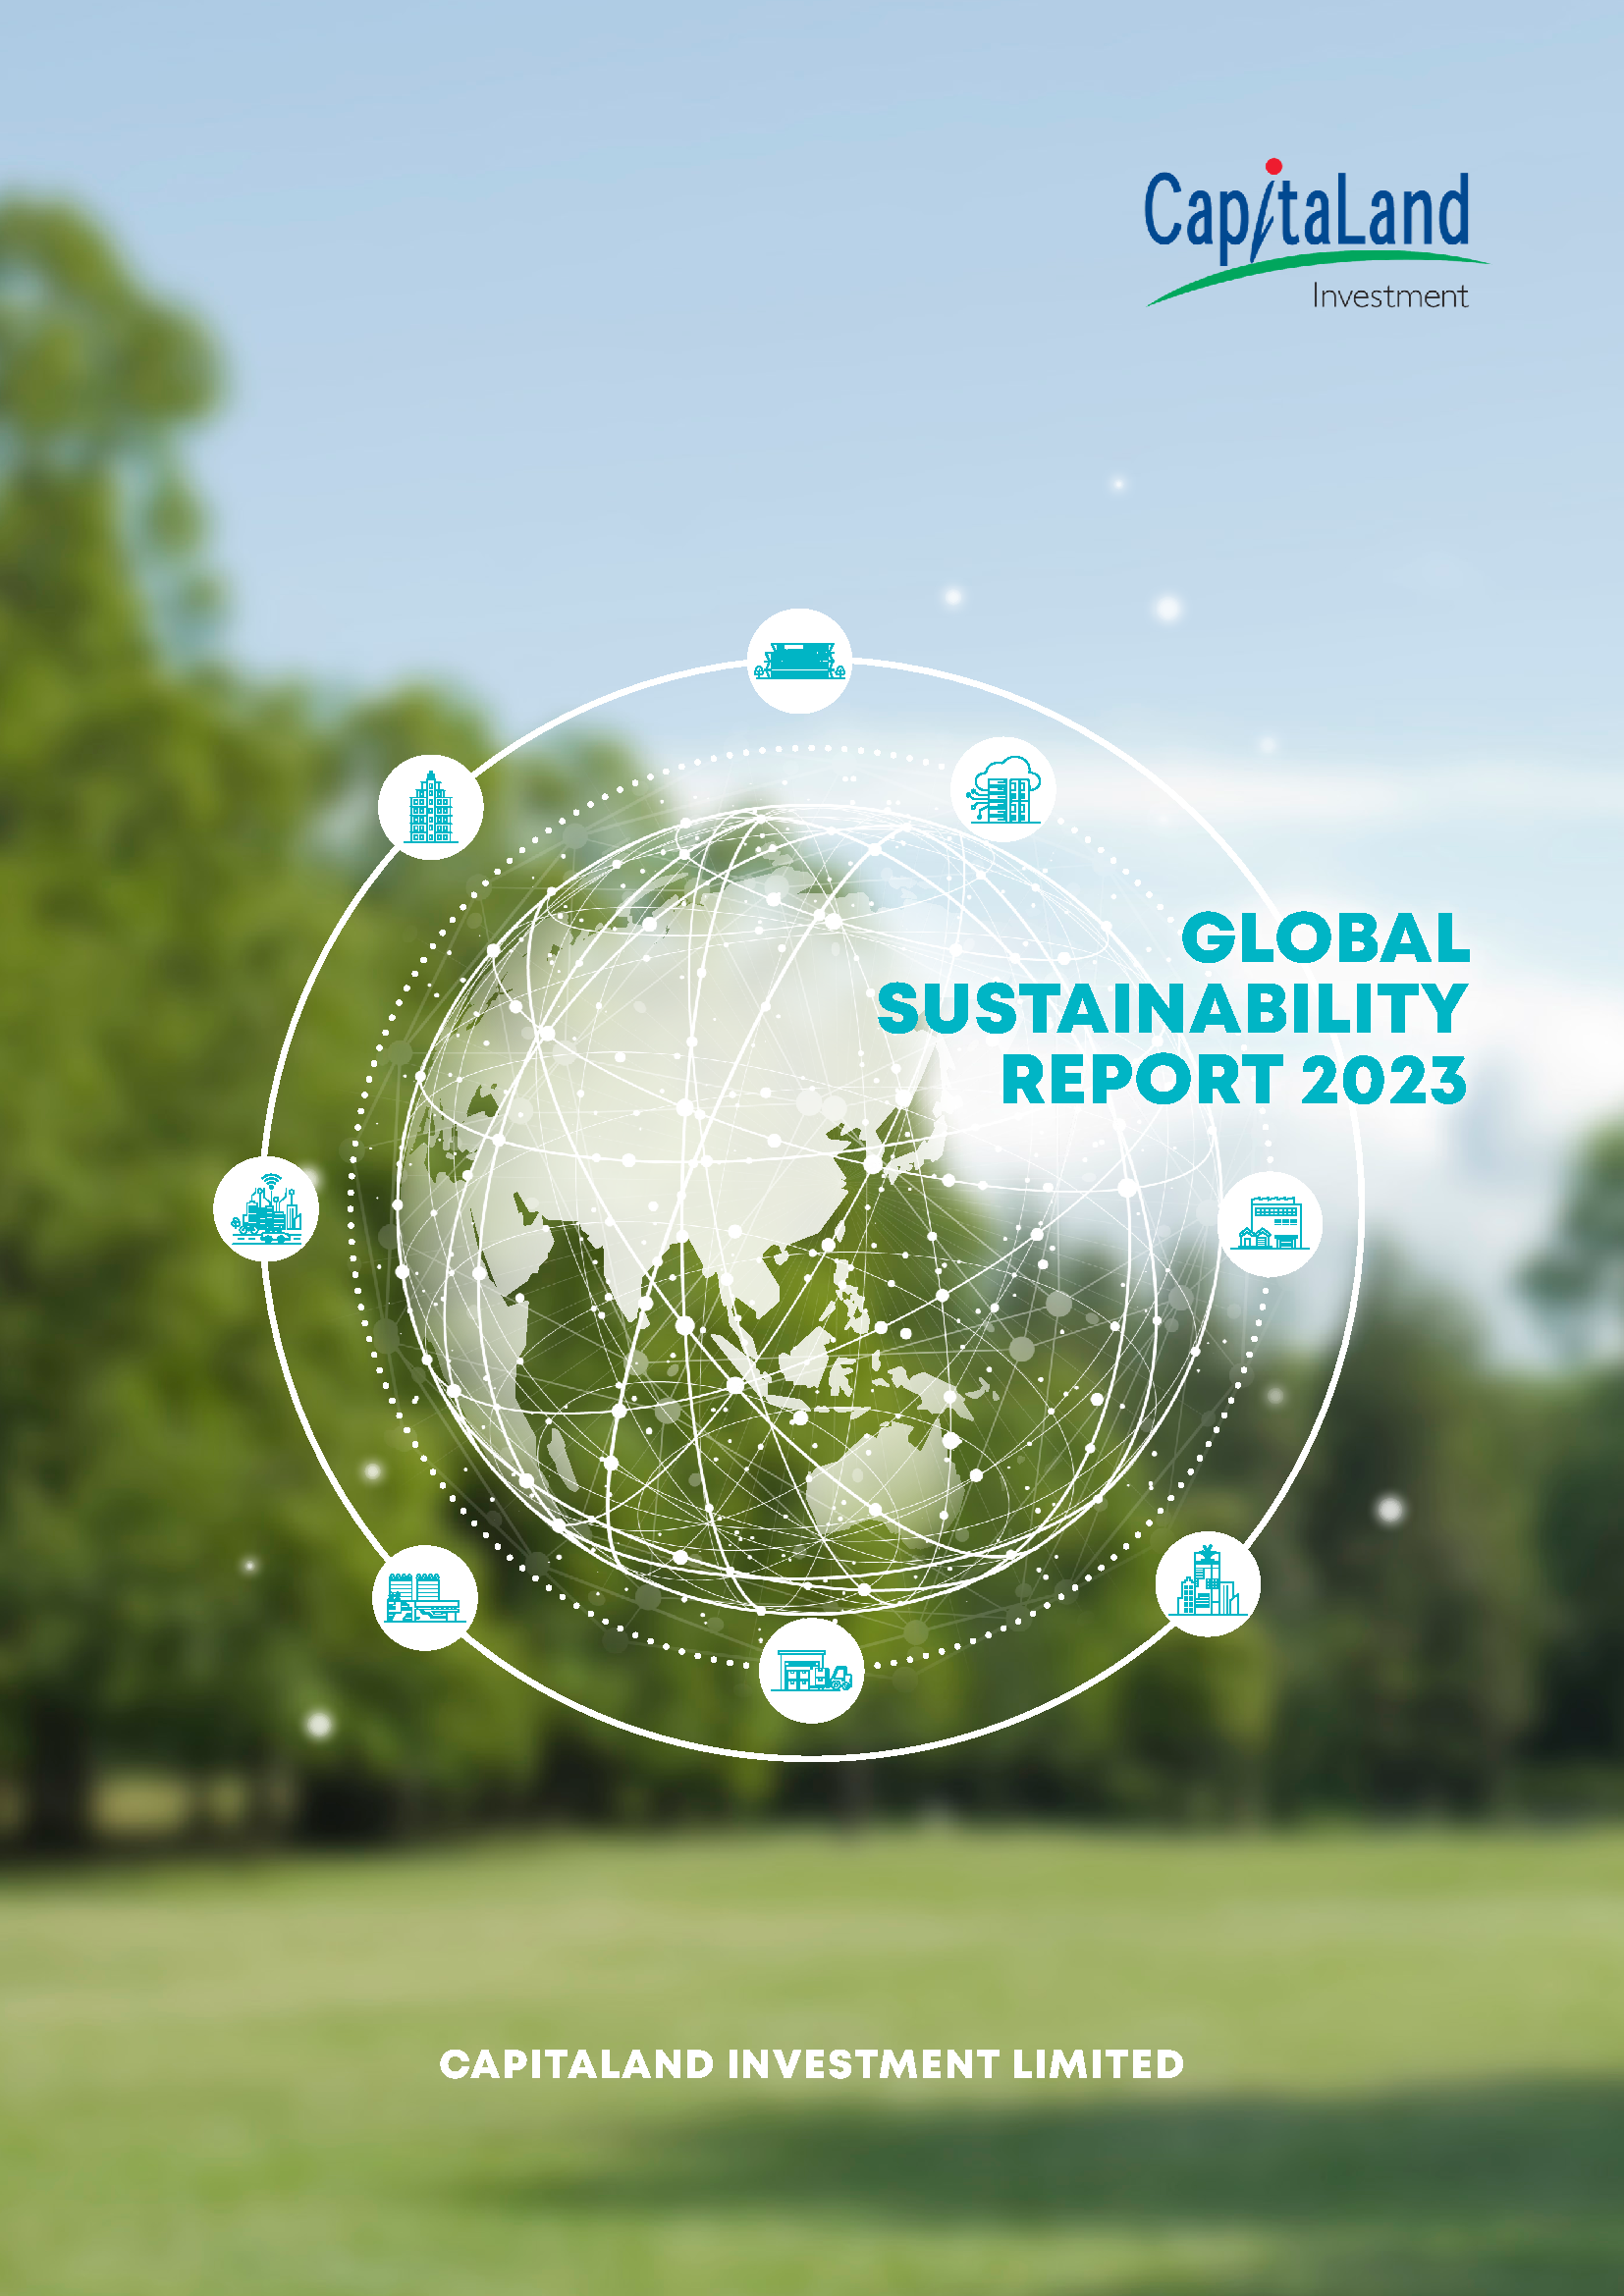 CapitaLand Investment Global Sustainability Report 2023 - GRI Standards